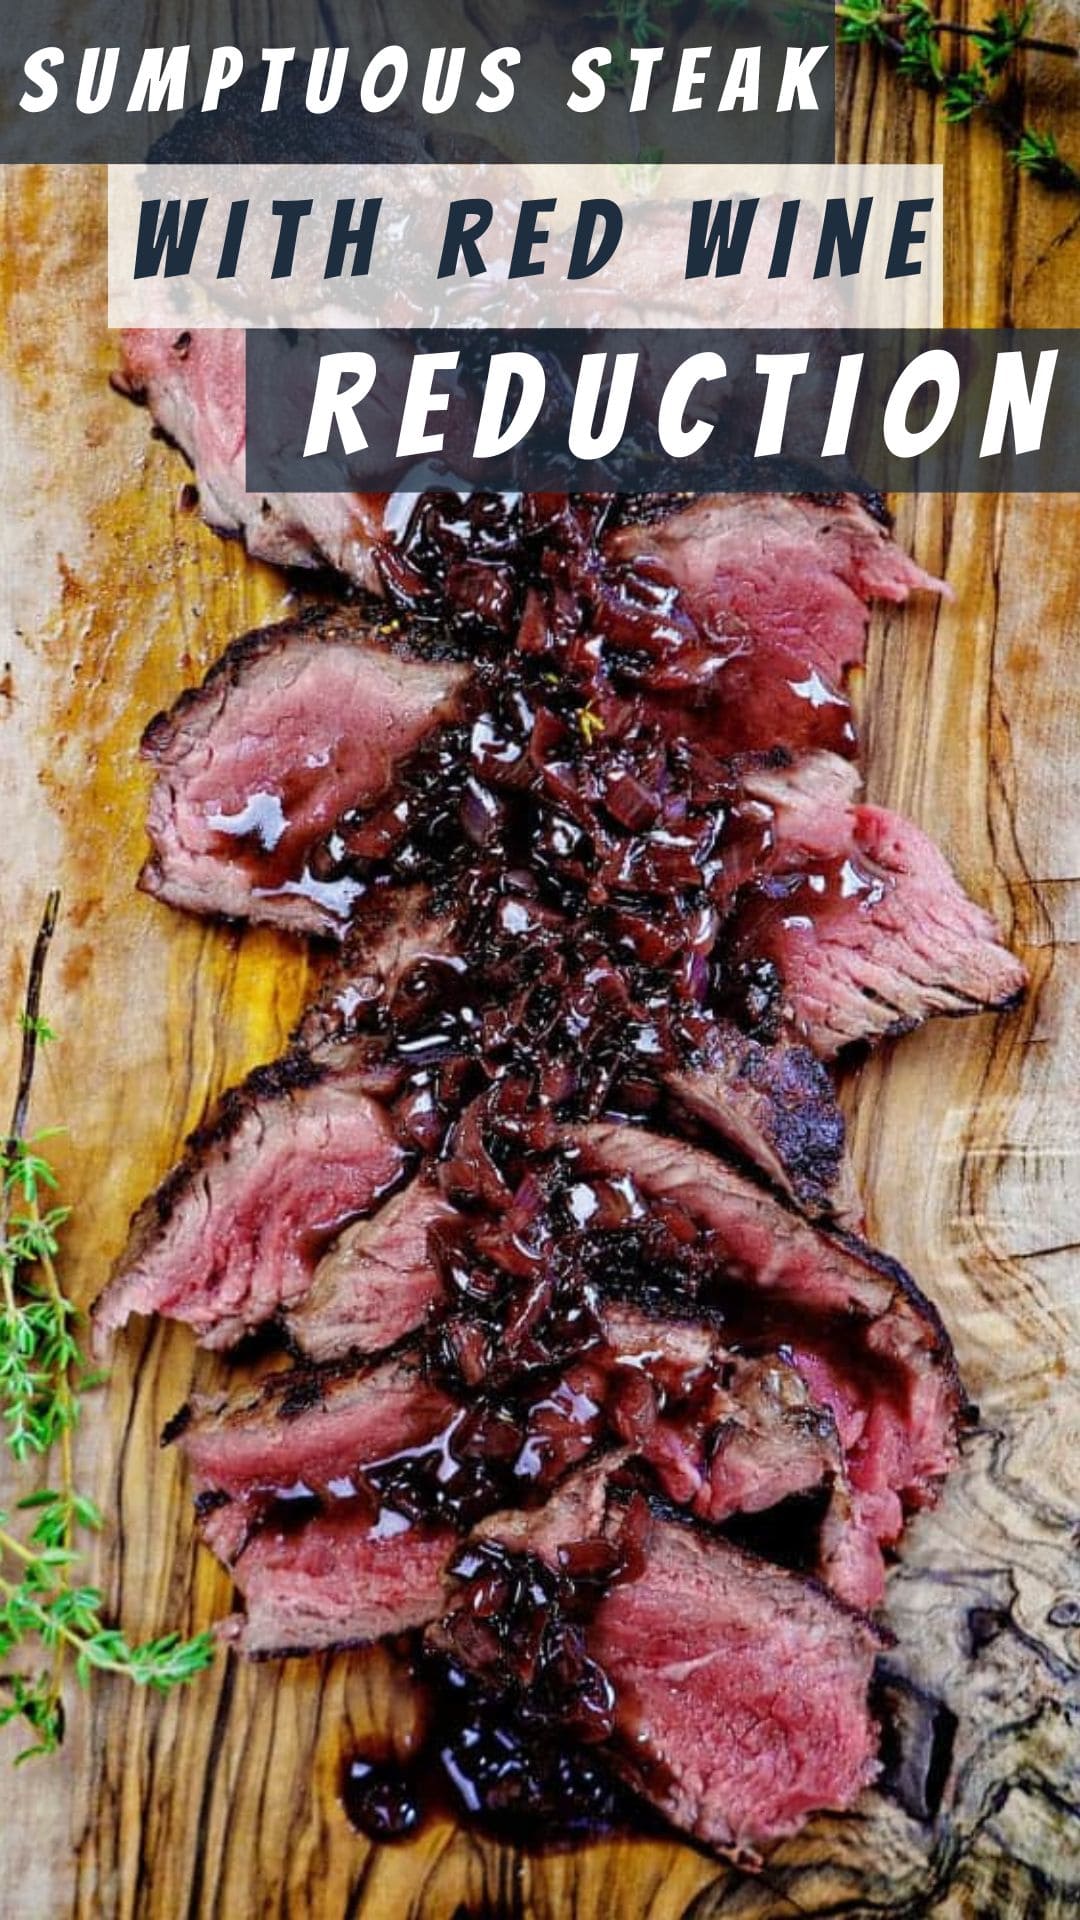 Sumptuous Steak with Red Wine Reduction